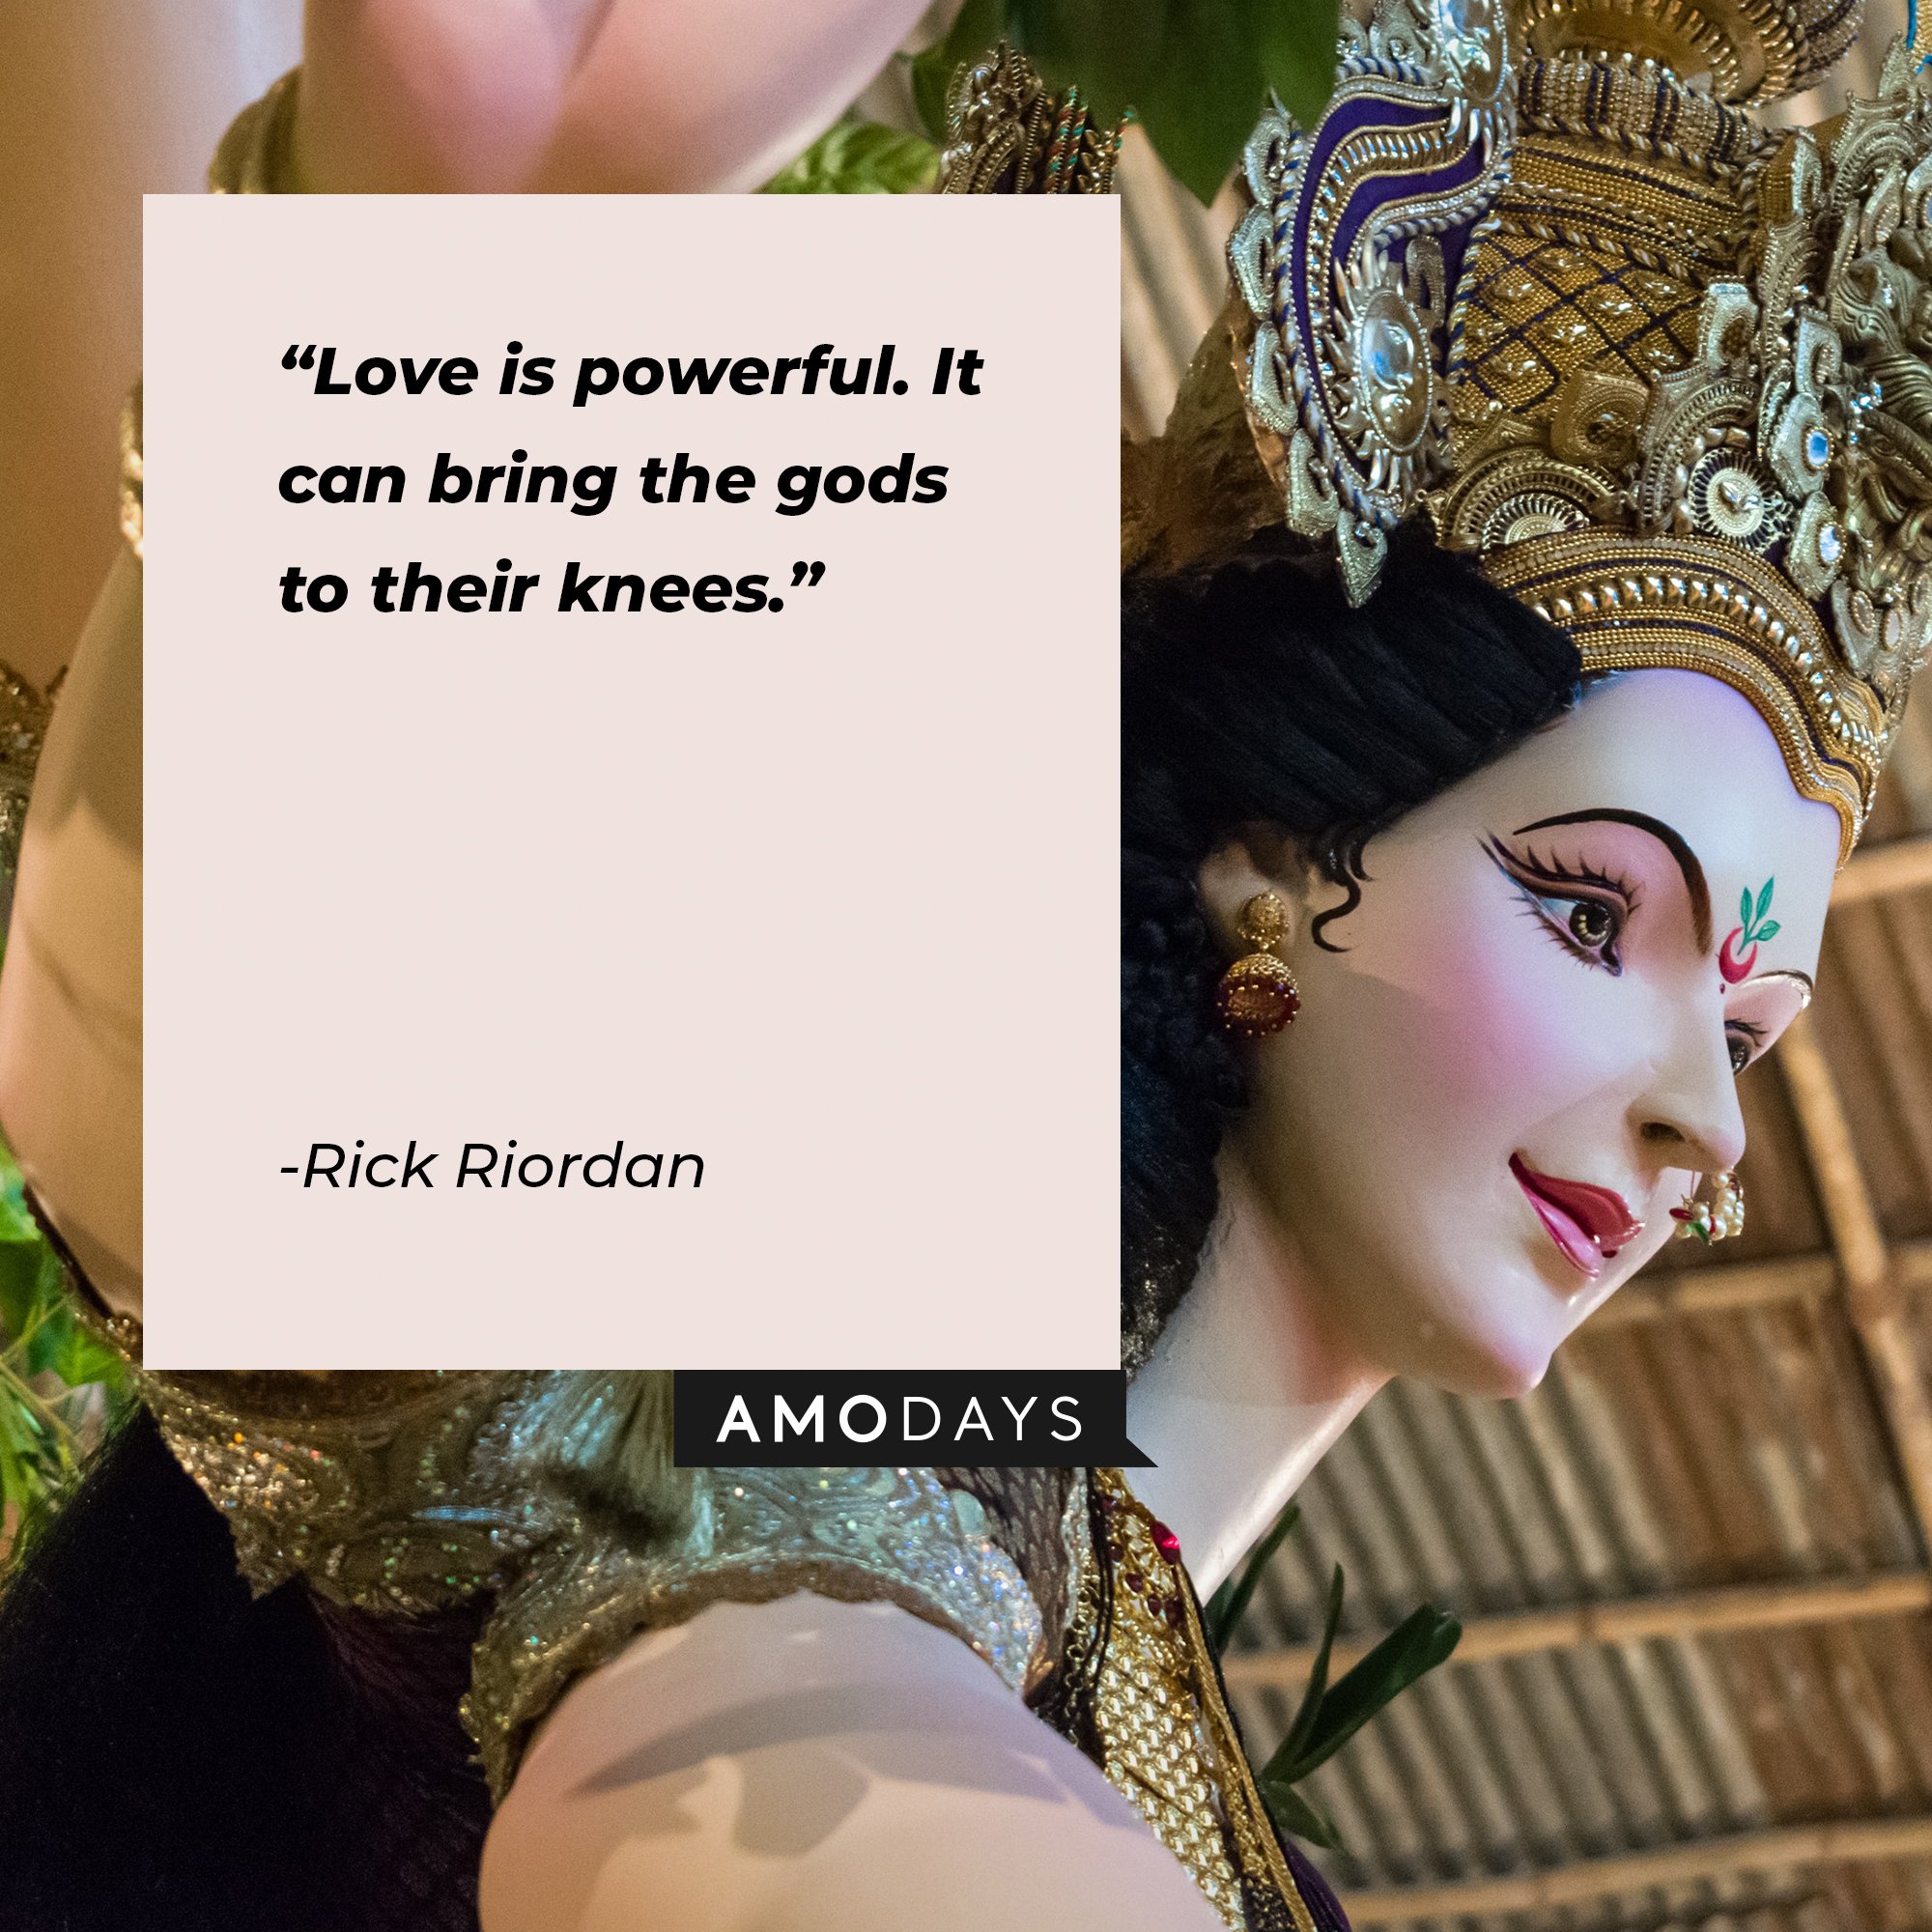  Rick Riordan’s quote: "Love is powerful. It can bring the gods to their knees." | Image: AmoDays